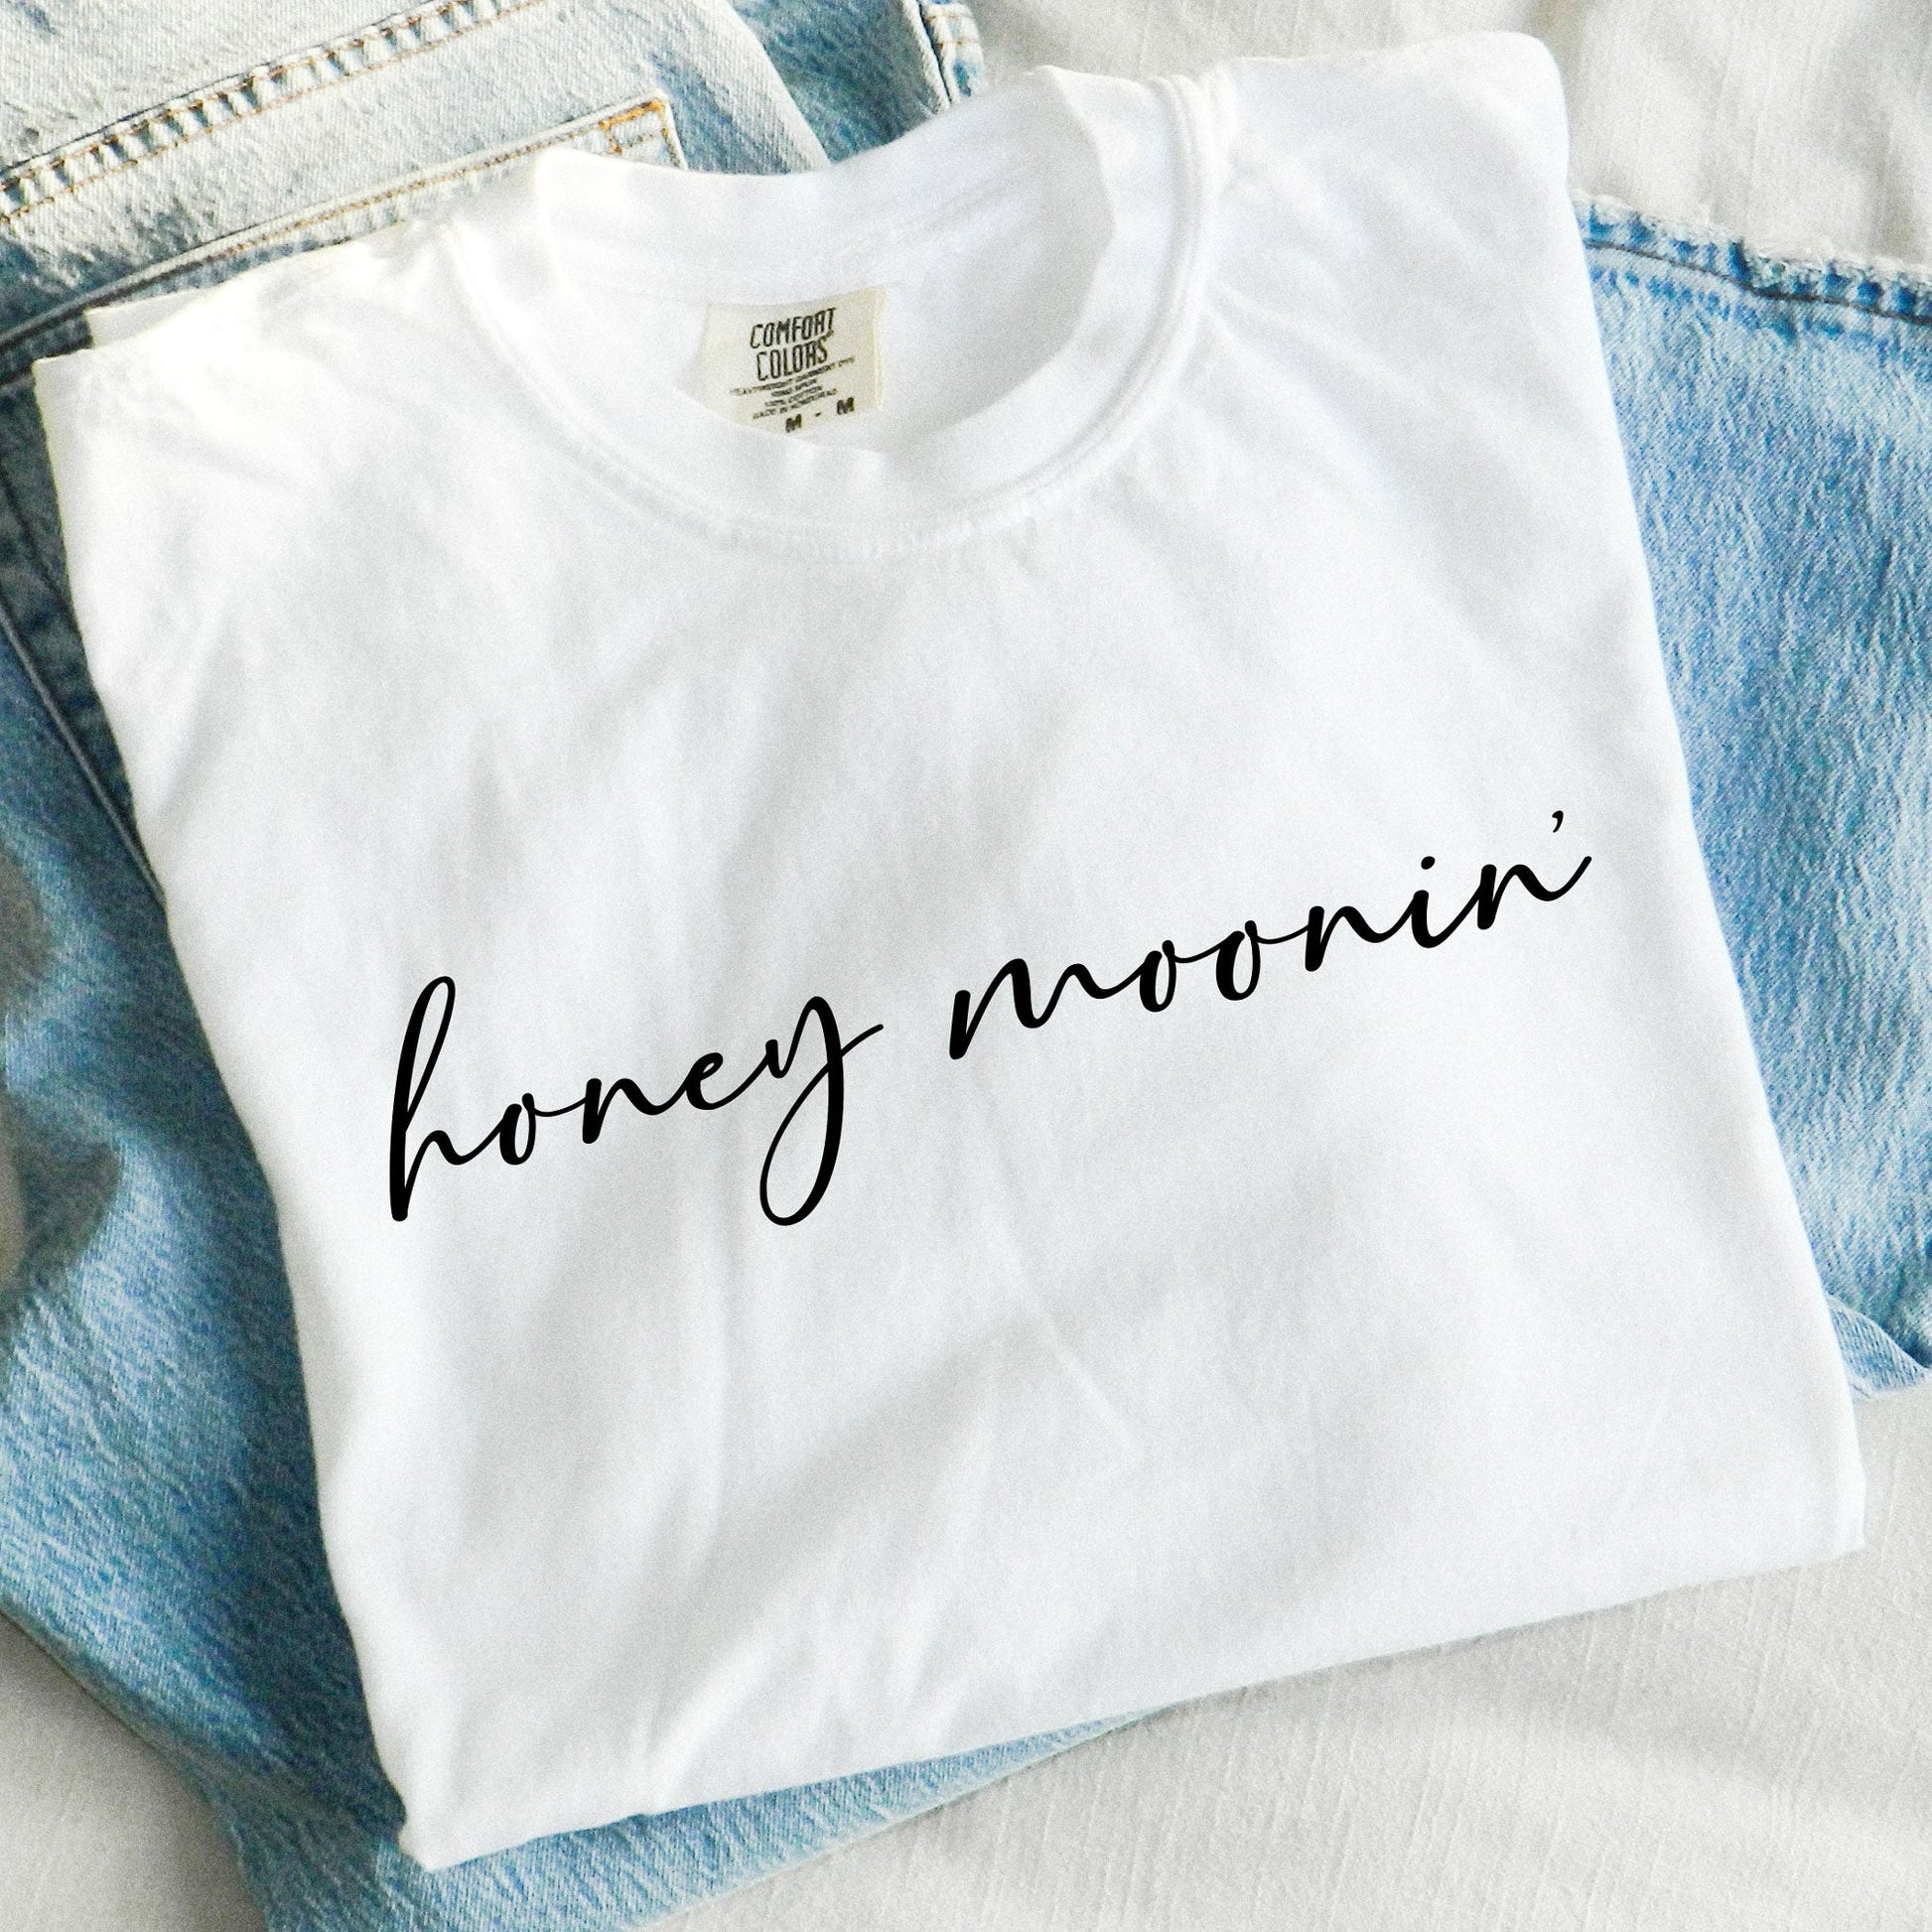 white comfort colors t-shirt with honey moonin' printed across the chest in a black script font